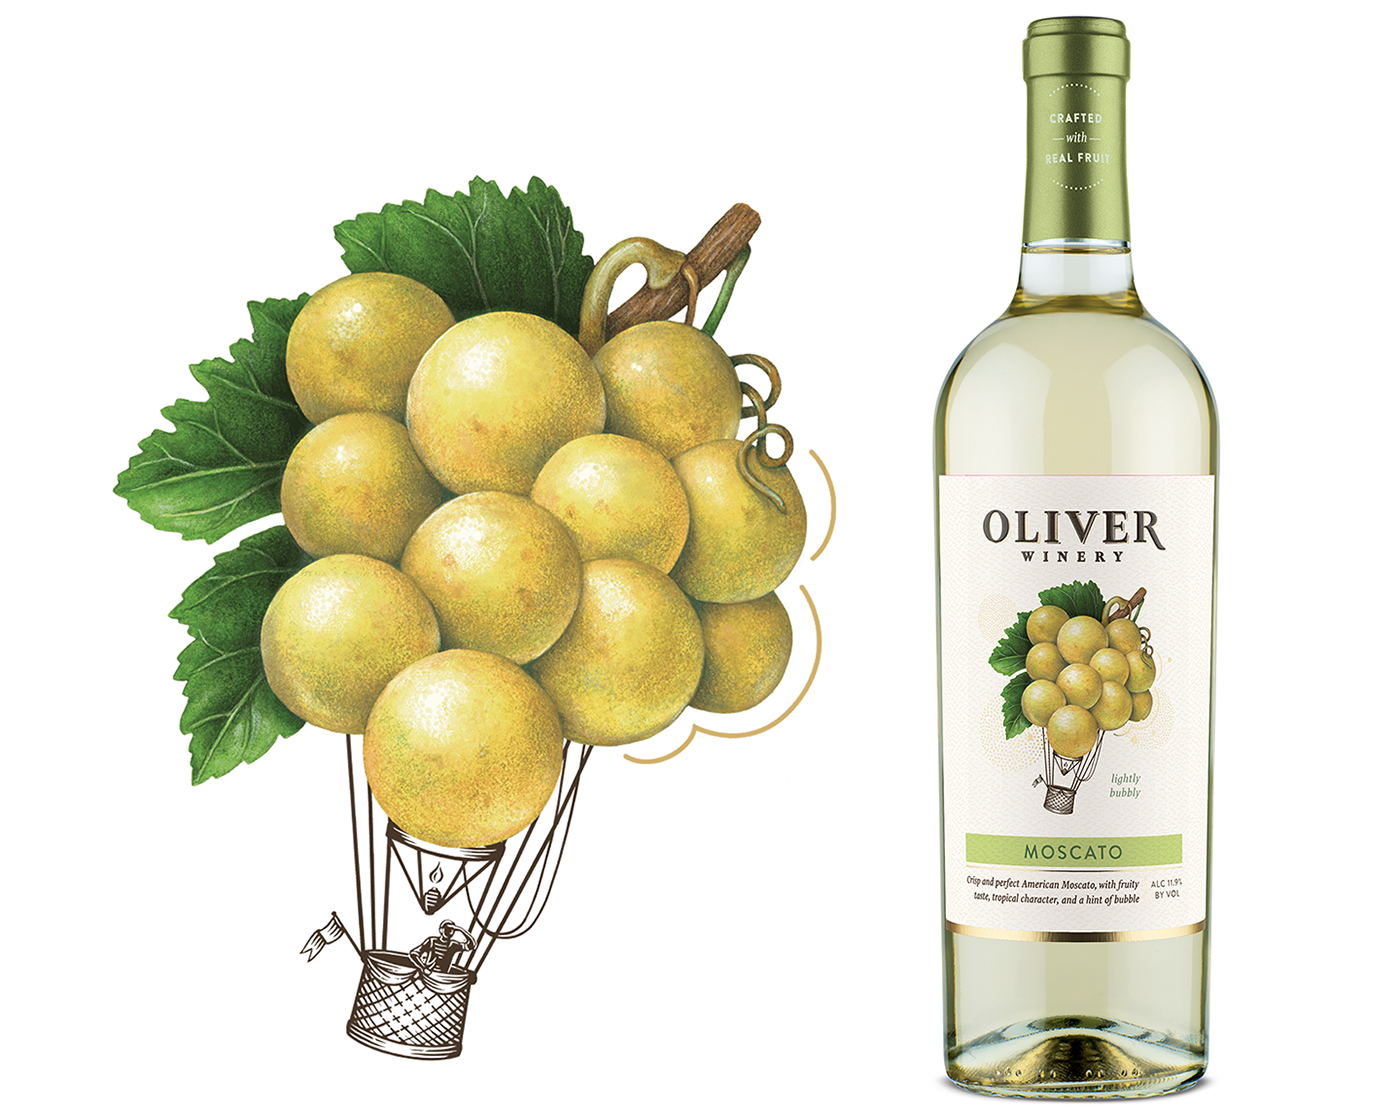 Watercolor illustration of a bunch of Moscato grapes used on packaging for Oliver Winery.